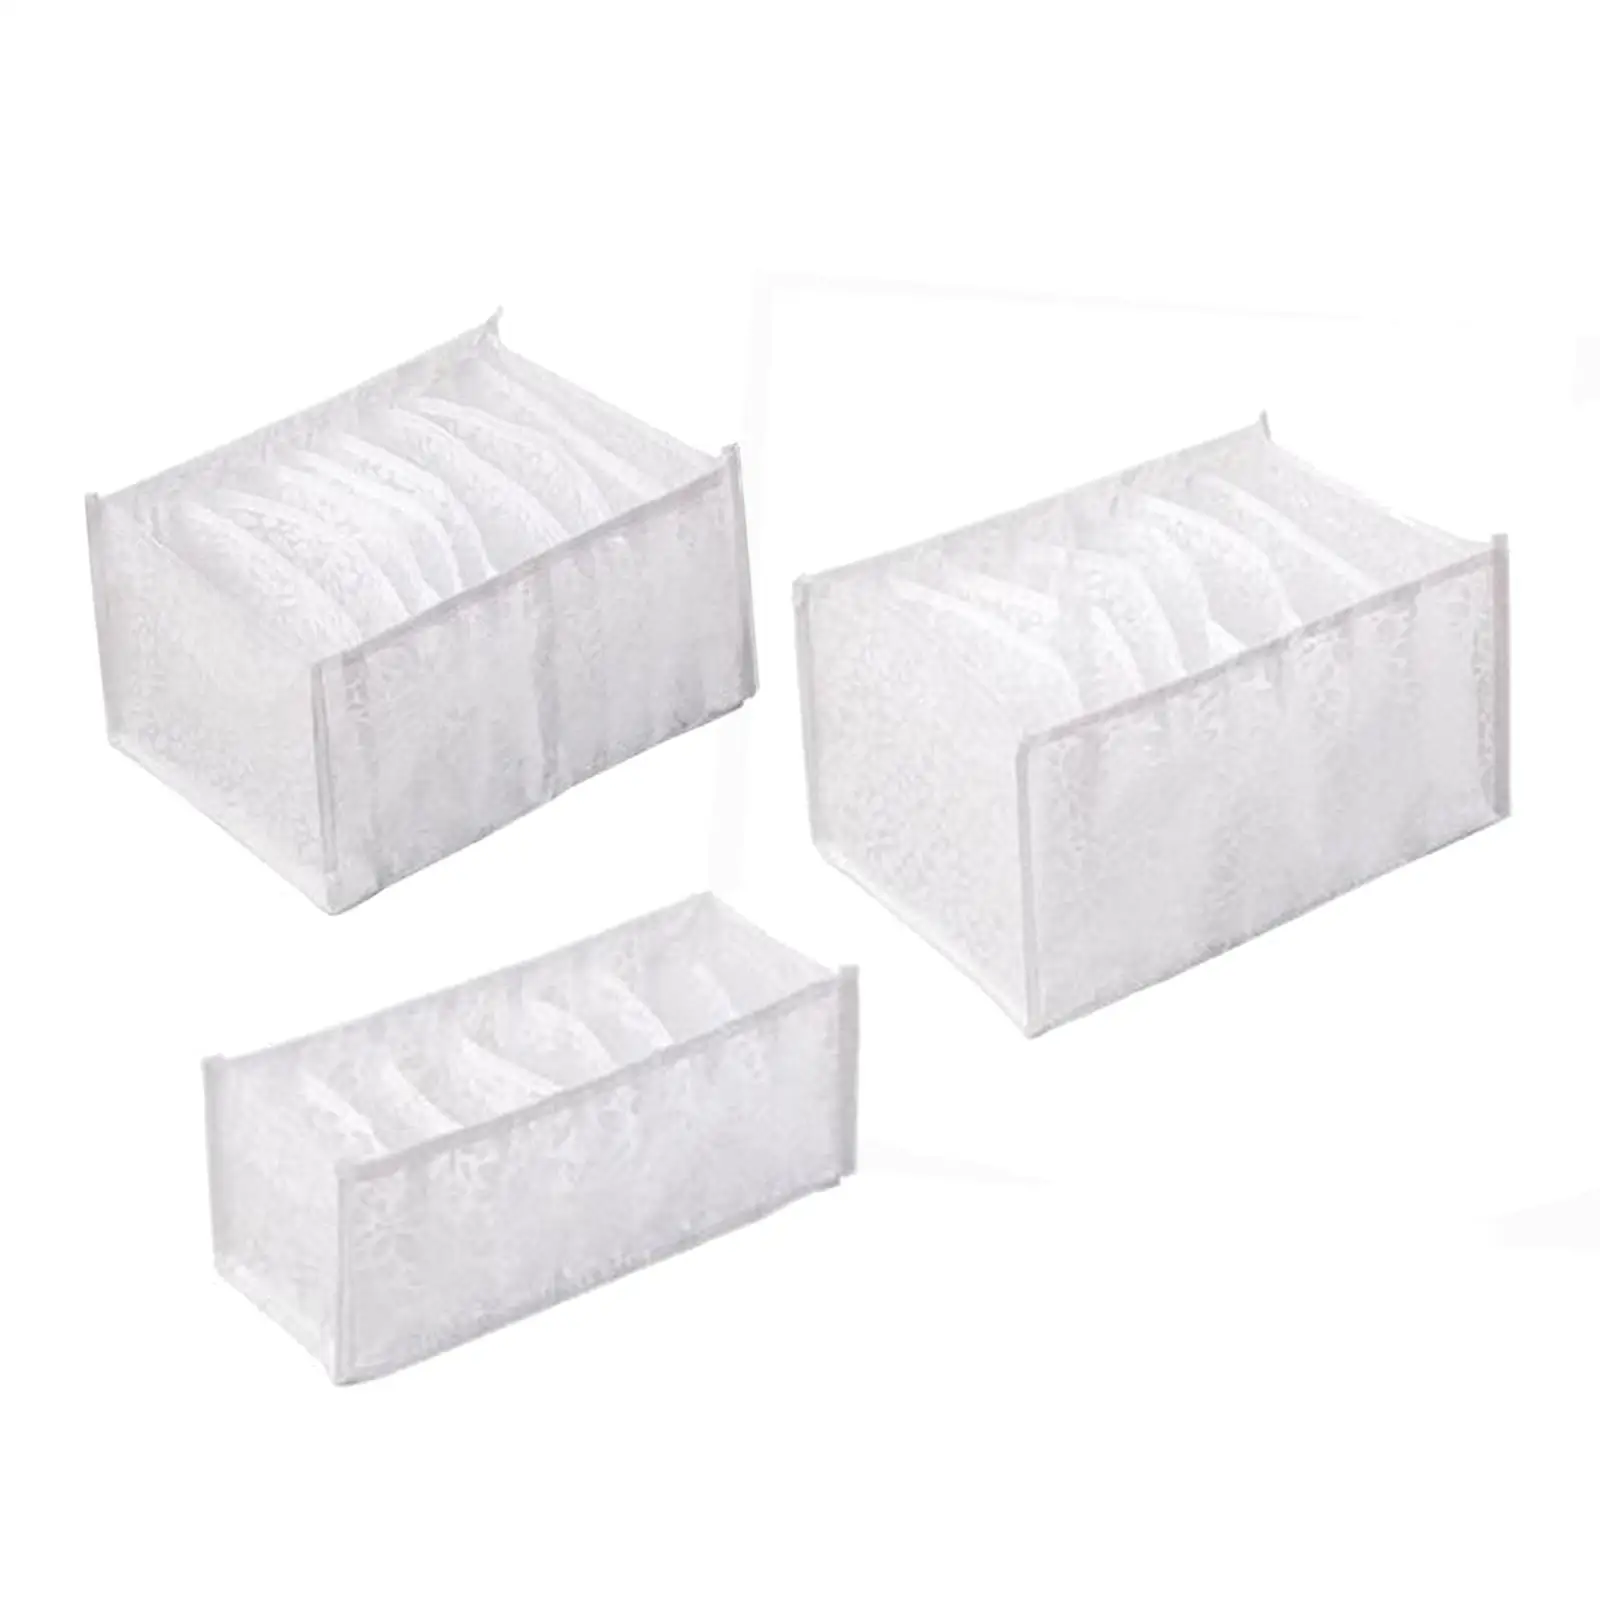 Clothes Storage Boxes with Compartments Stackable Portable Closet Organizer for Clothing Storage Underwear Skirts Bra Bedroom